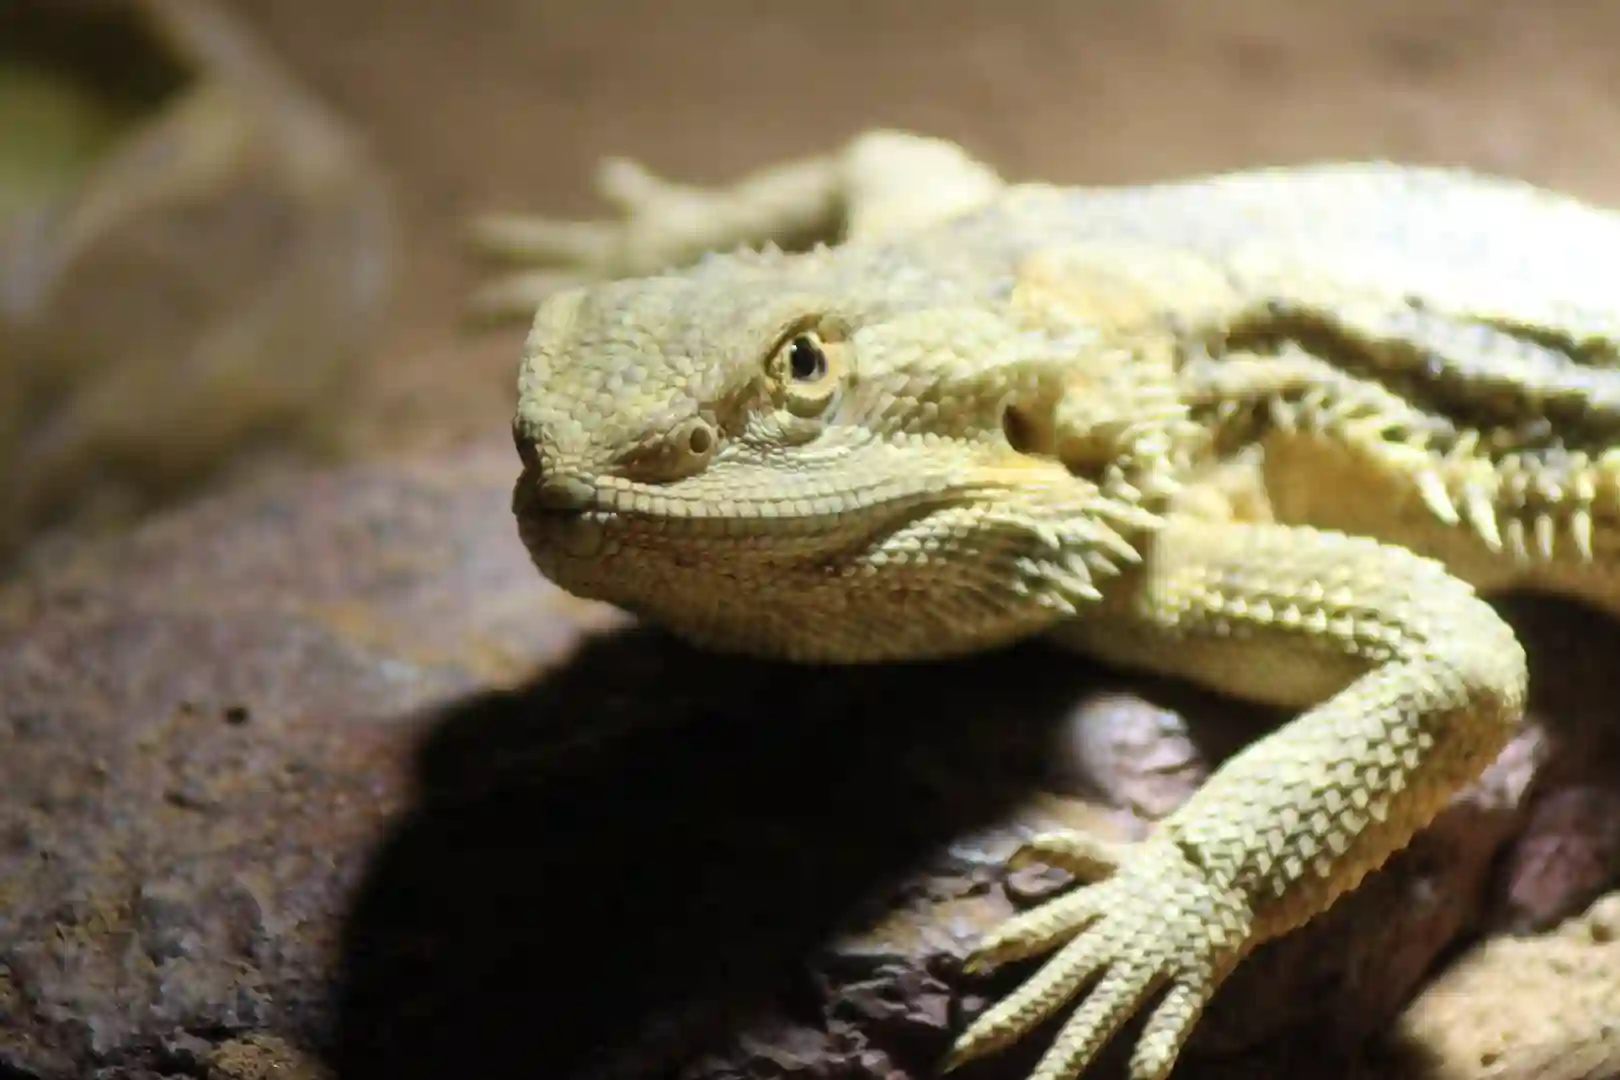 Can Bearded Dragons Eat Red Leaf Lettuce?